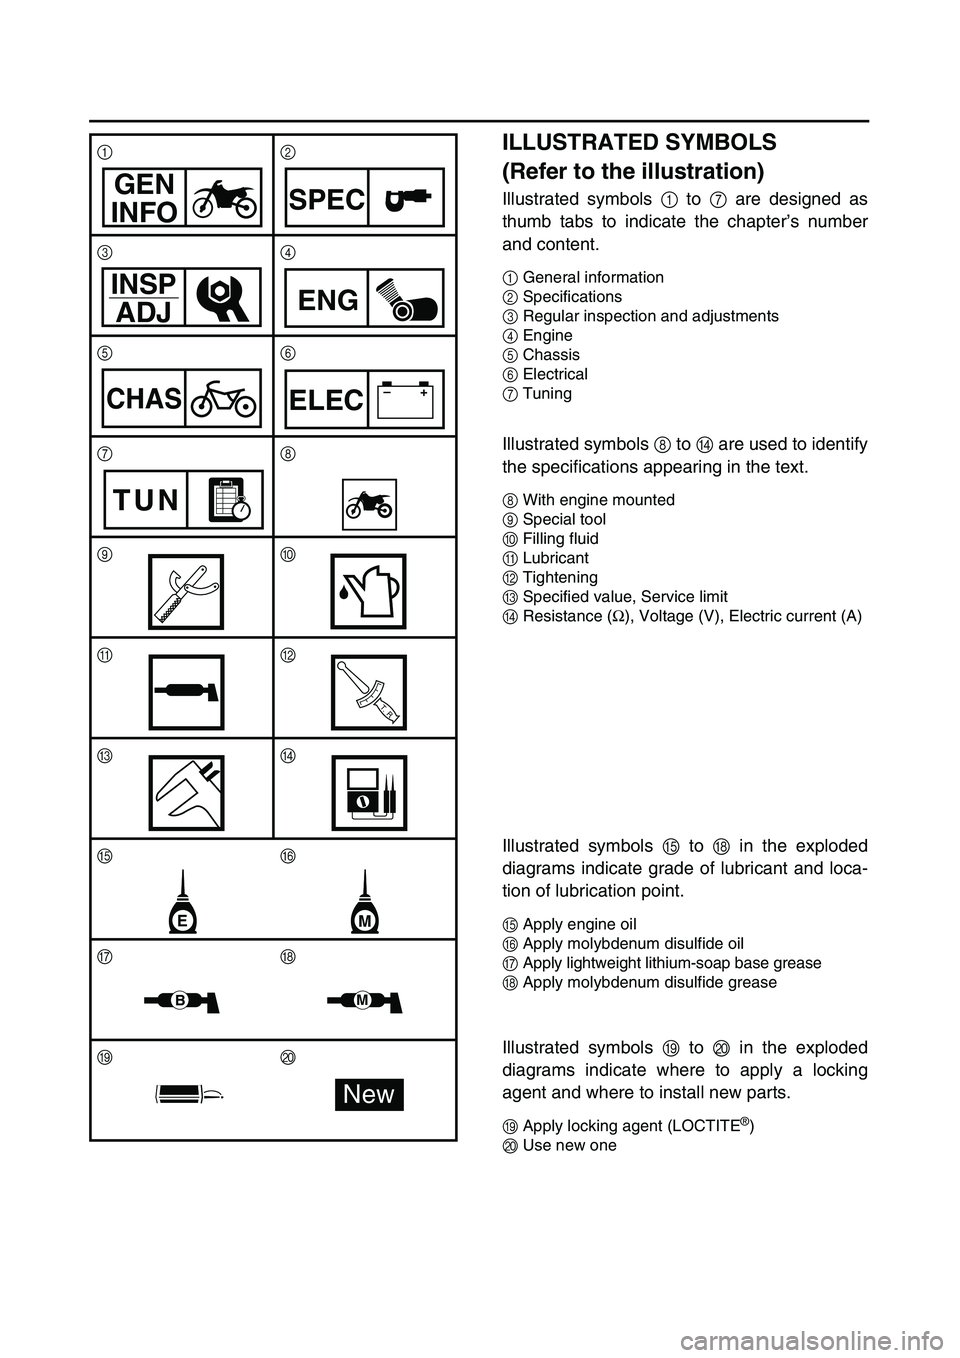 YAMAHA WR 450F 2004  Manuale de Empleo (in Spanish)  
ILLUSTRATED SYMBOLS 
(Refer to the illustration) 
Illustrated symbols   
1  
 to   
7  
 are designed as
thumb tabs to indicate the chapter’s number
and content. 
1  
General information  
2  
Spe